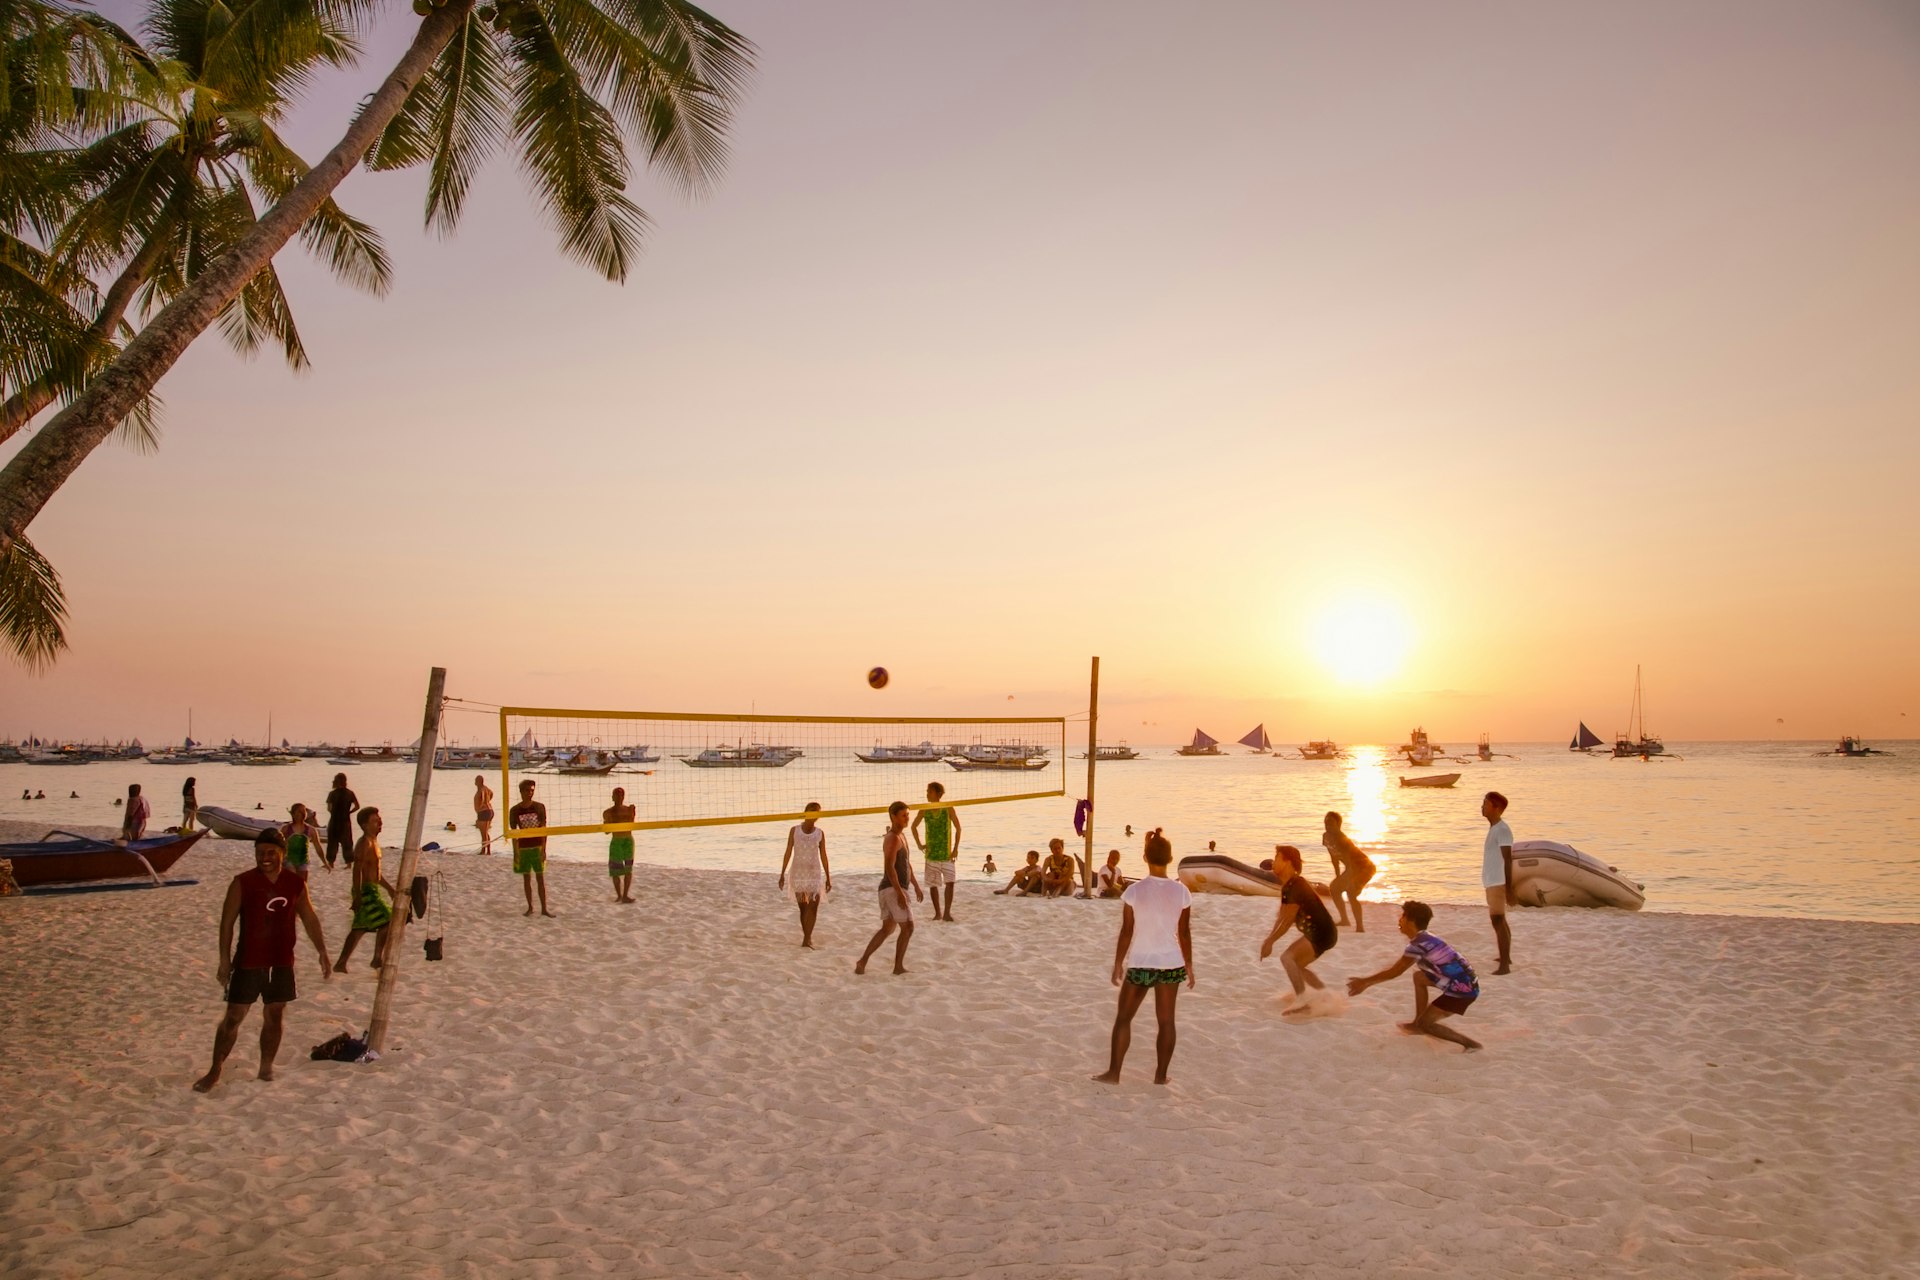 A group of people play volleyball as the sun sets at White beach, Boracay Island.